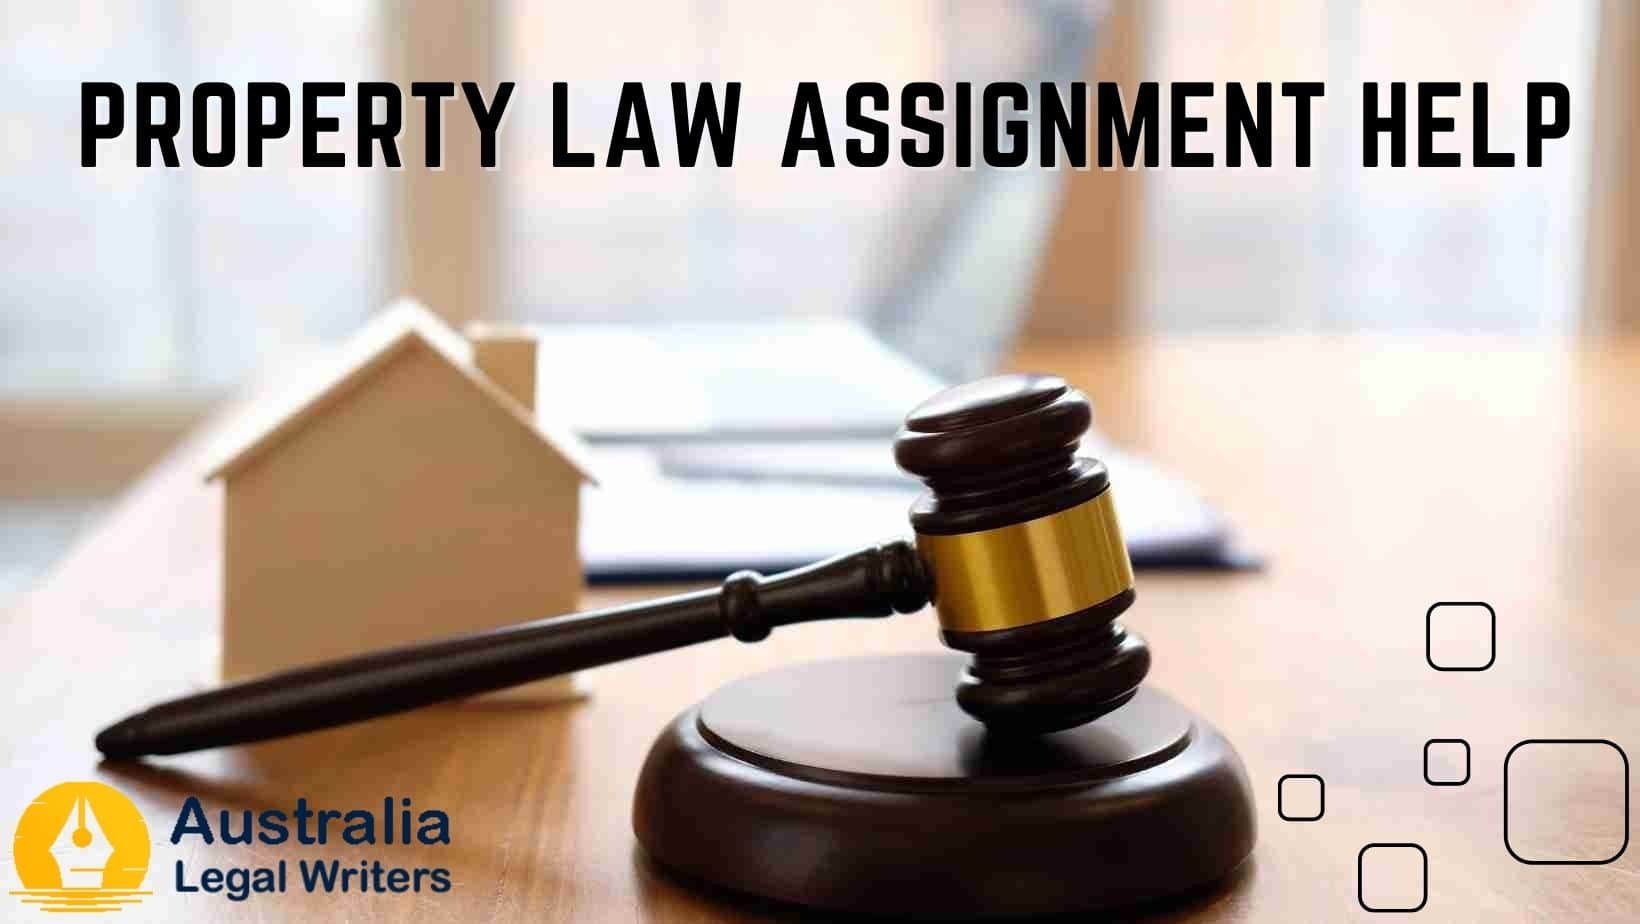 Get Expert Property Law Assignment help in Australia - Hire Us Today